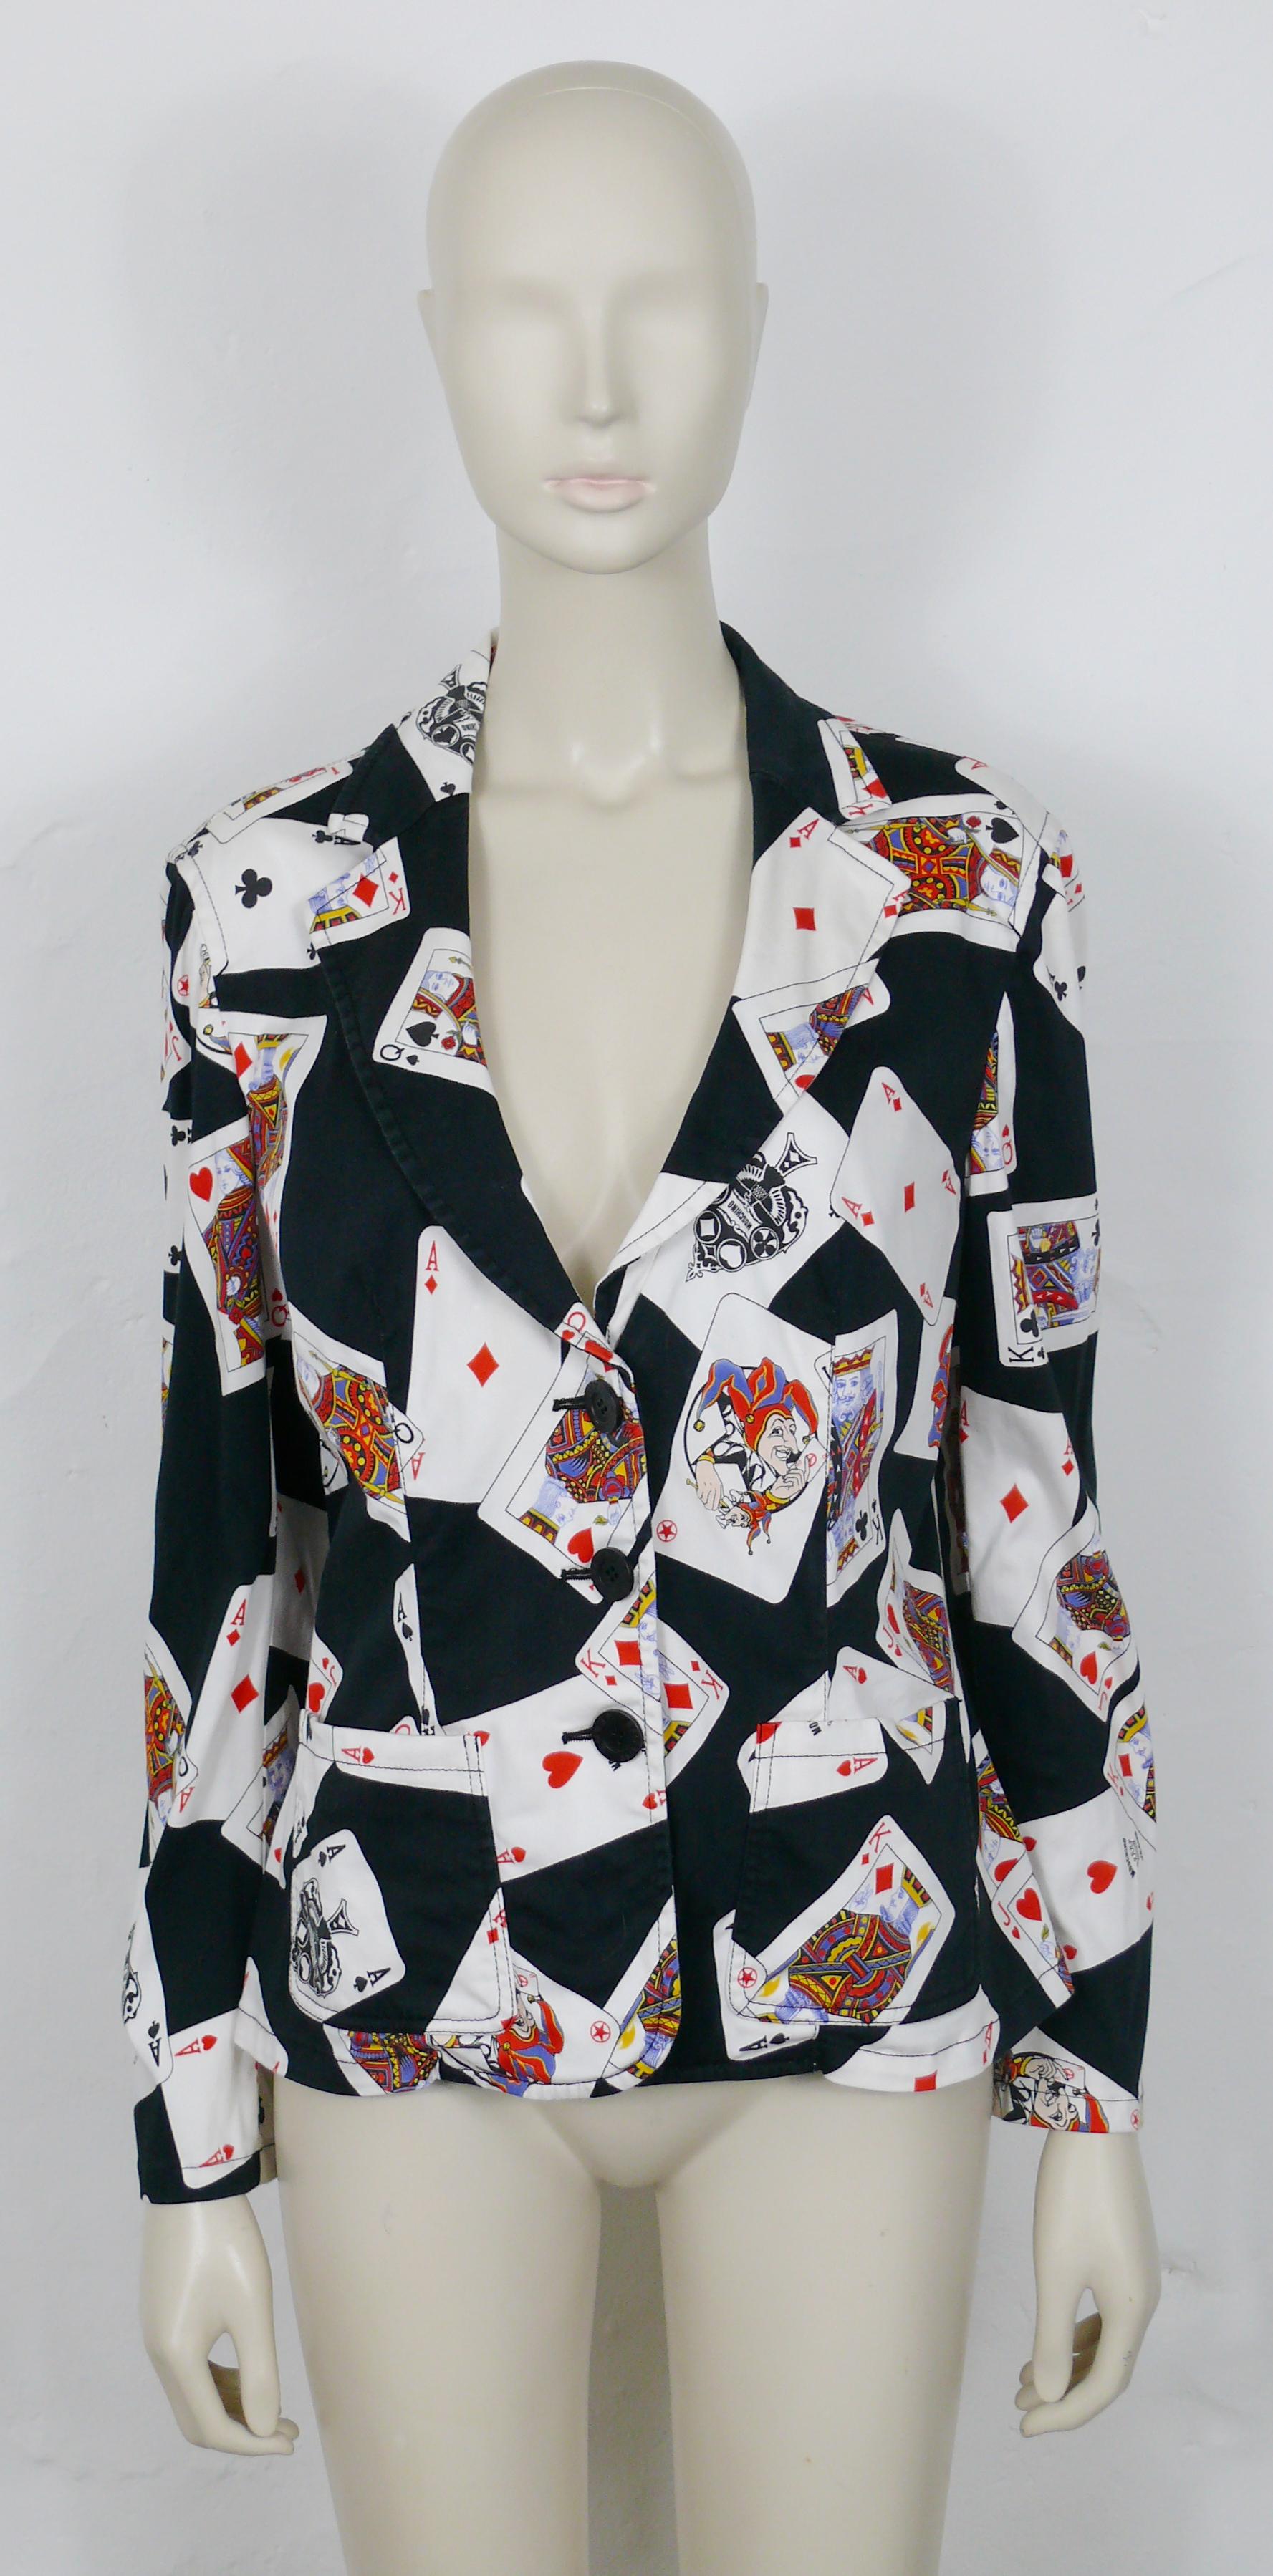 MOSCHINO JEANS vintage black supple blazer featuring a multicolored playing cards print all-over.

Front button down closure.

Label reads MOSCHINO JEANS Made in Italy.

Marked Size : I 46 / USA 12 / F 42 / GB 16 / D 42.
Please refer to